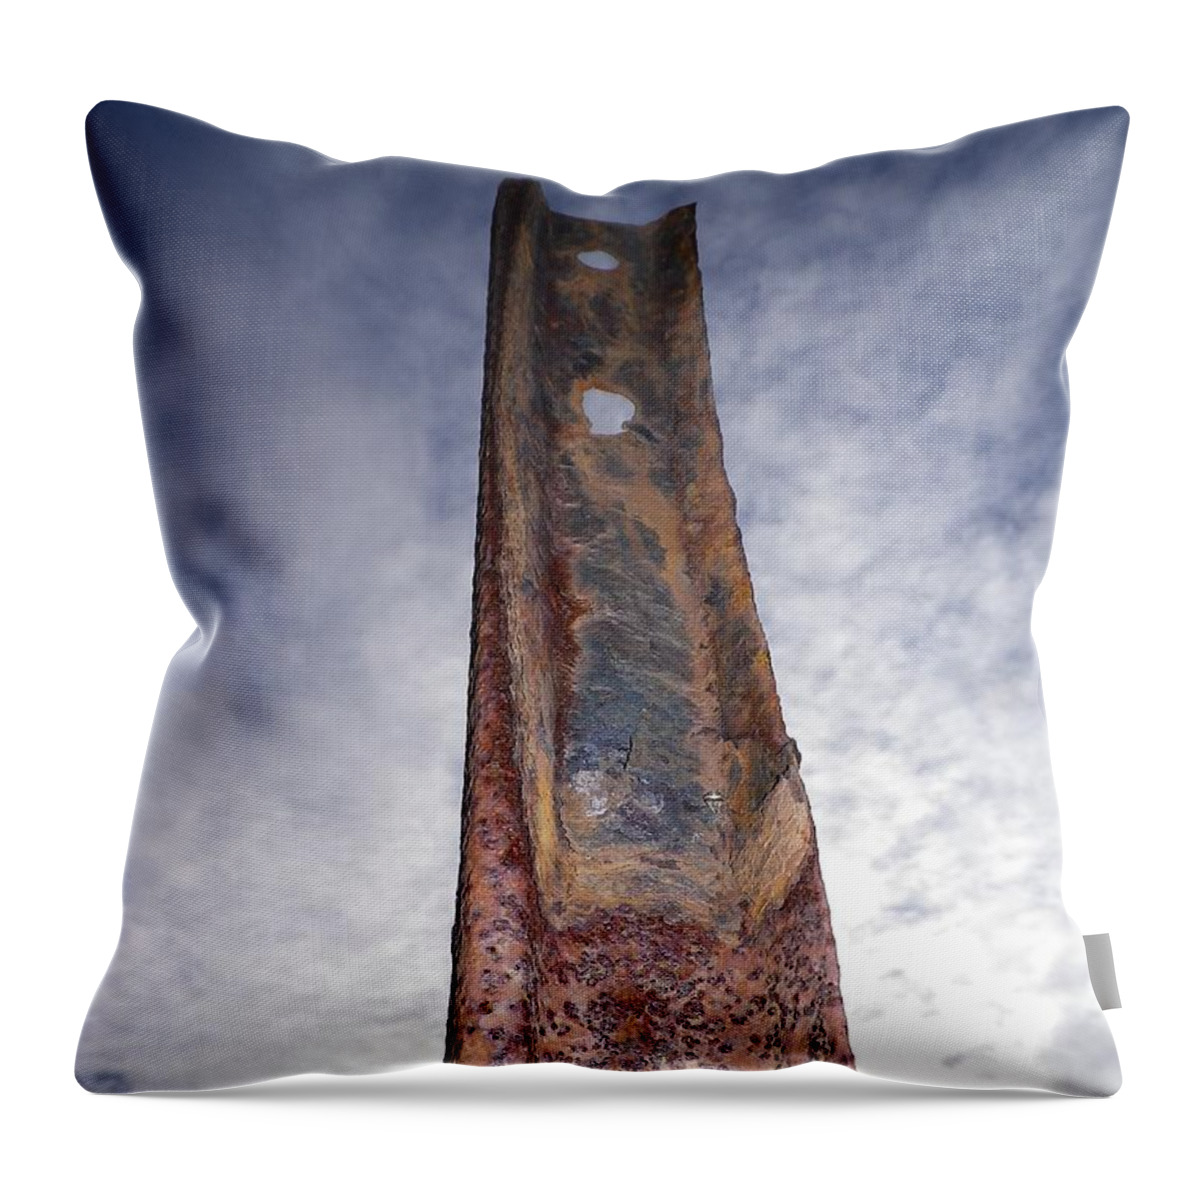 Sky Throw Pillow featuring the photograph Reach For The Stars by Richard Brookes